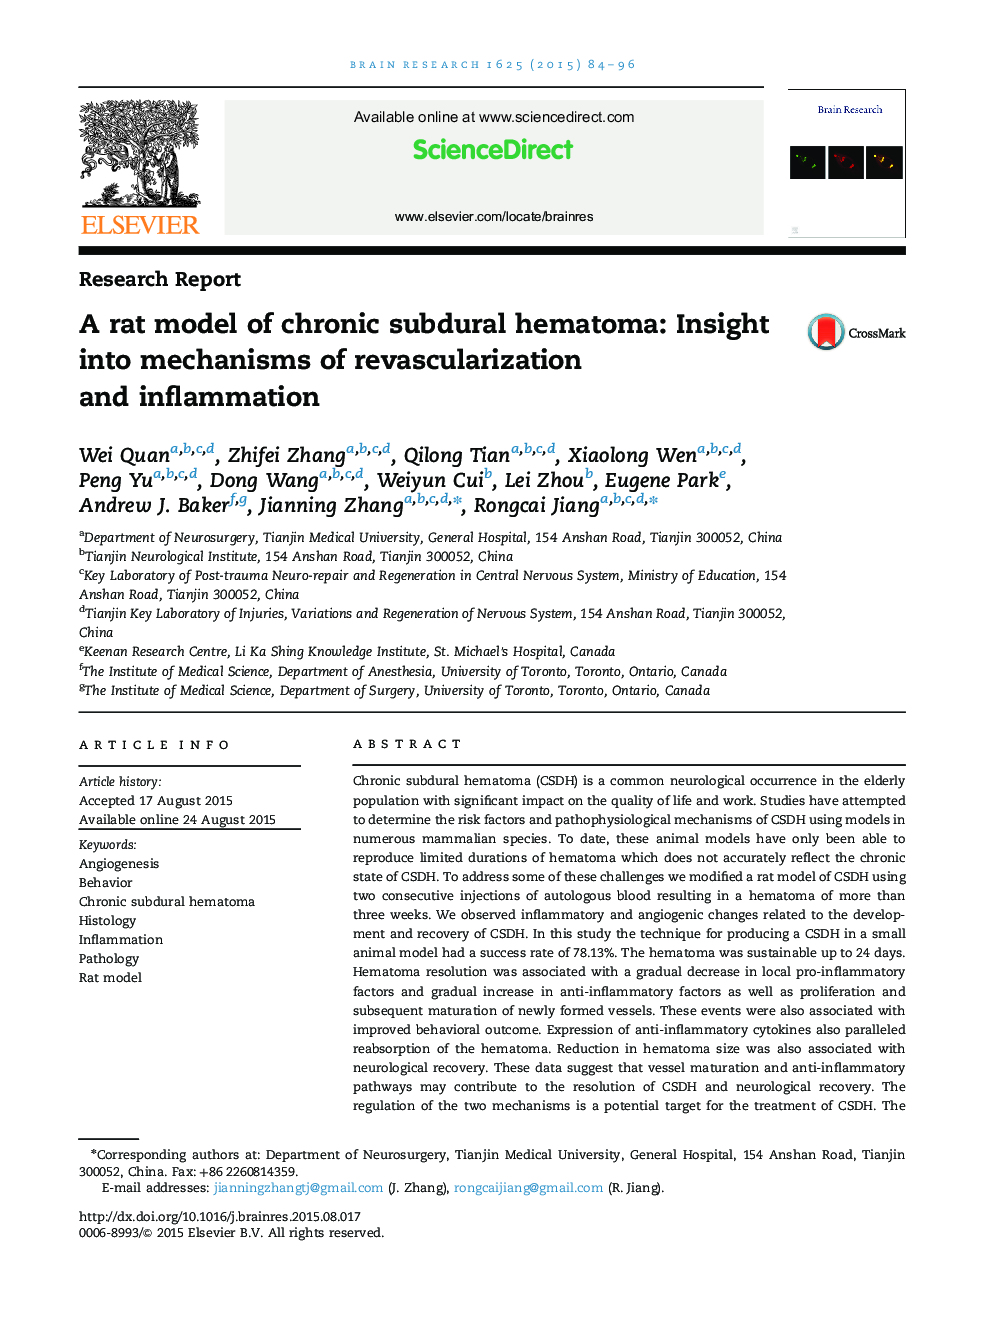 Research ReportA rat model of chronic subdural hematoma: Insight into mechanisms of revascularization and inflammation